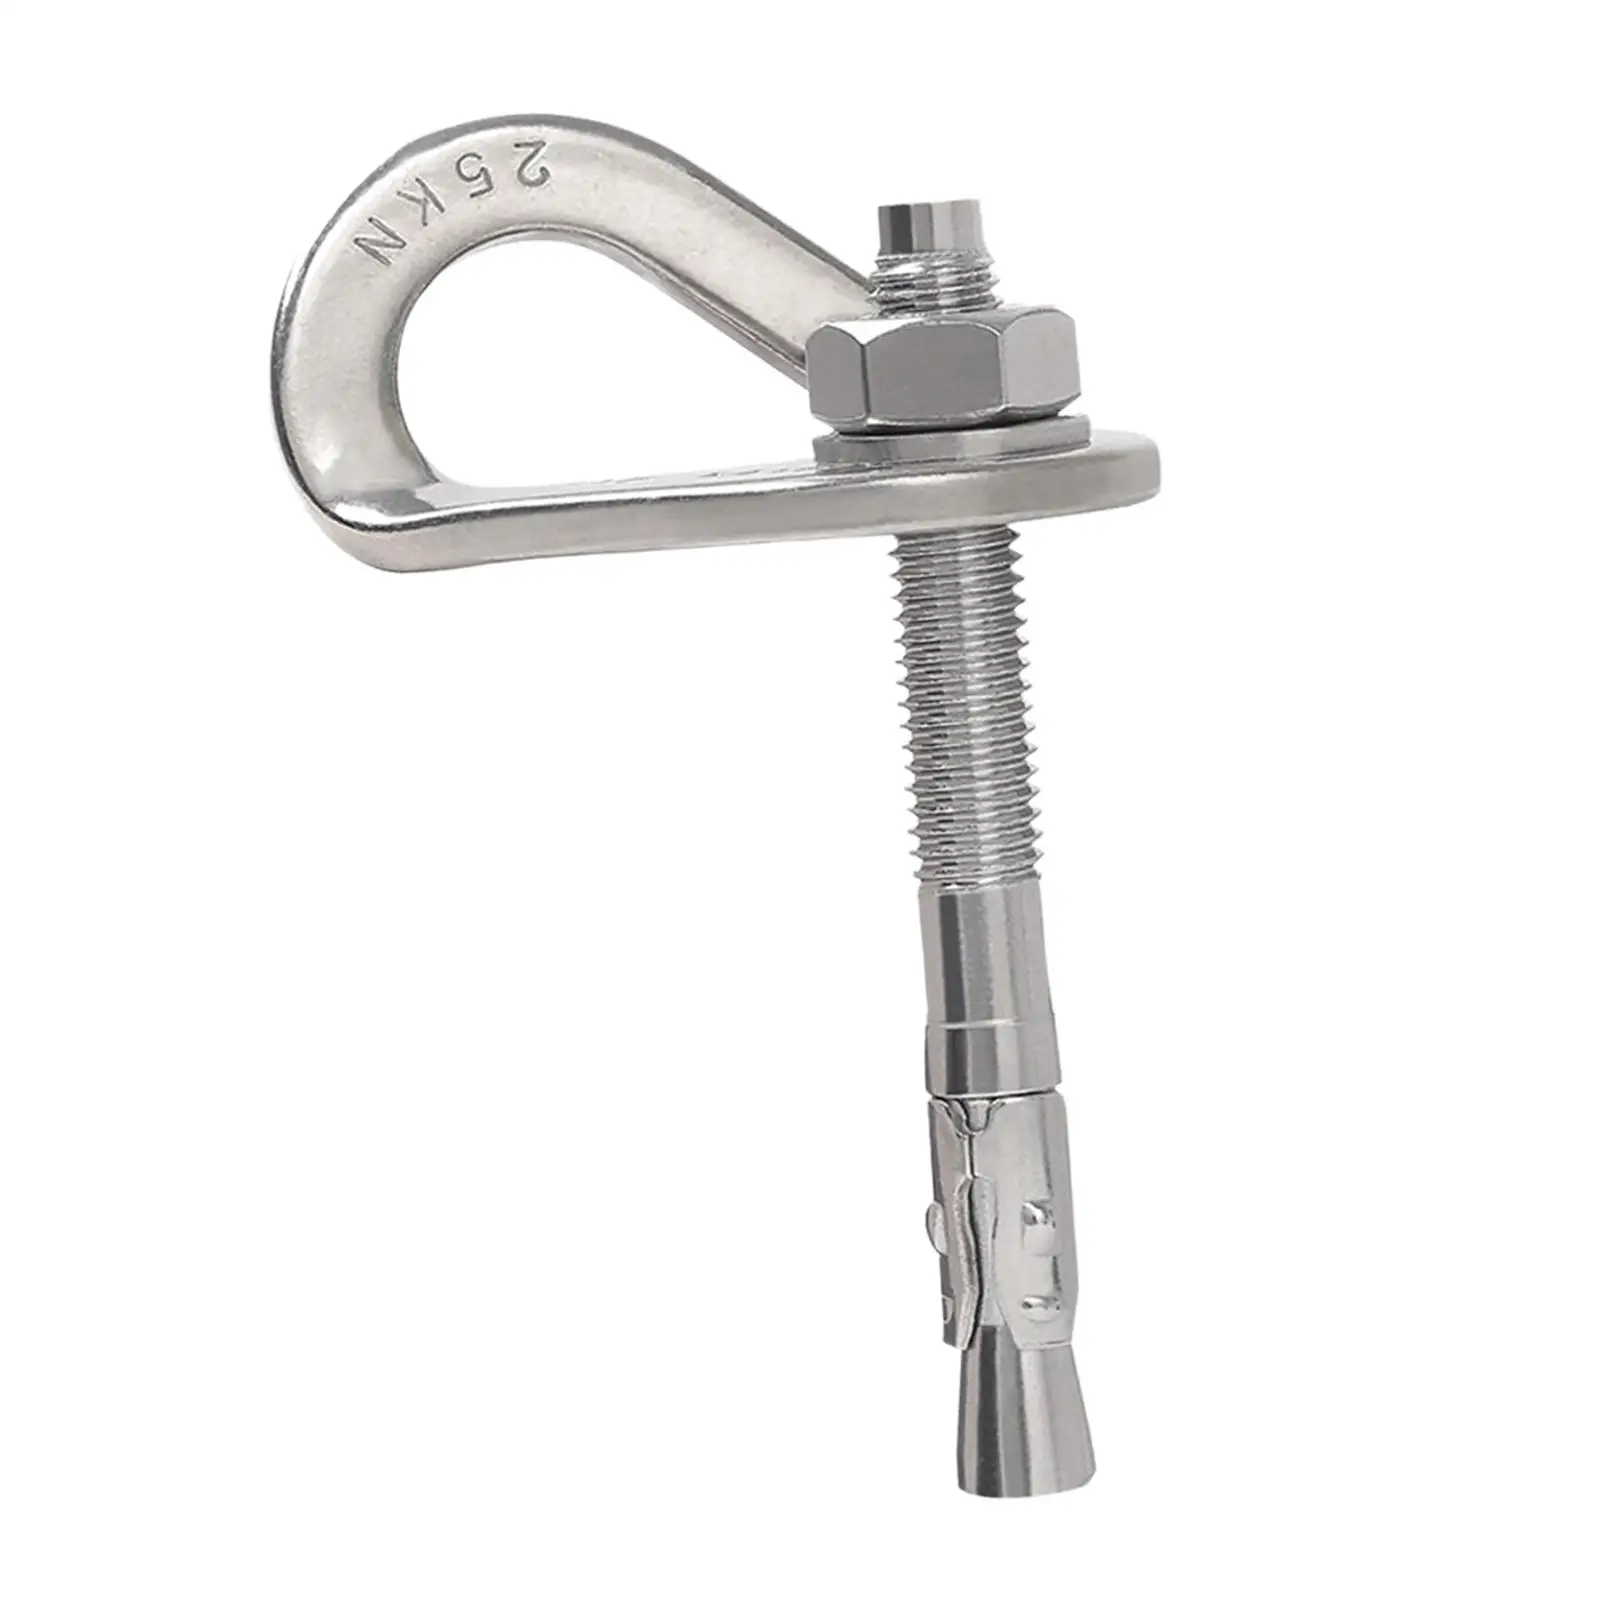 Climbing Anchor Hanger Fixed Point Expansion Nail Bolt Hanger for Hiking